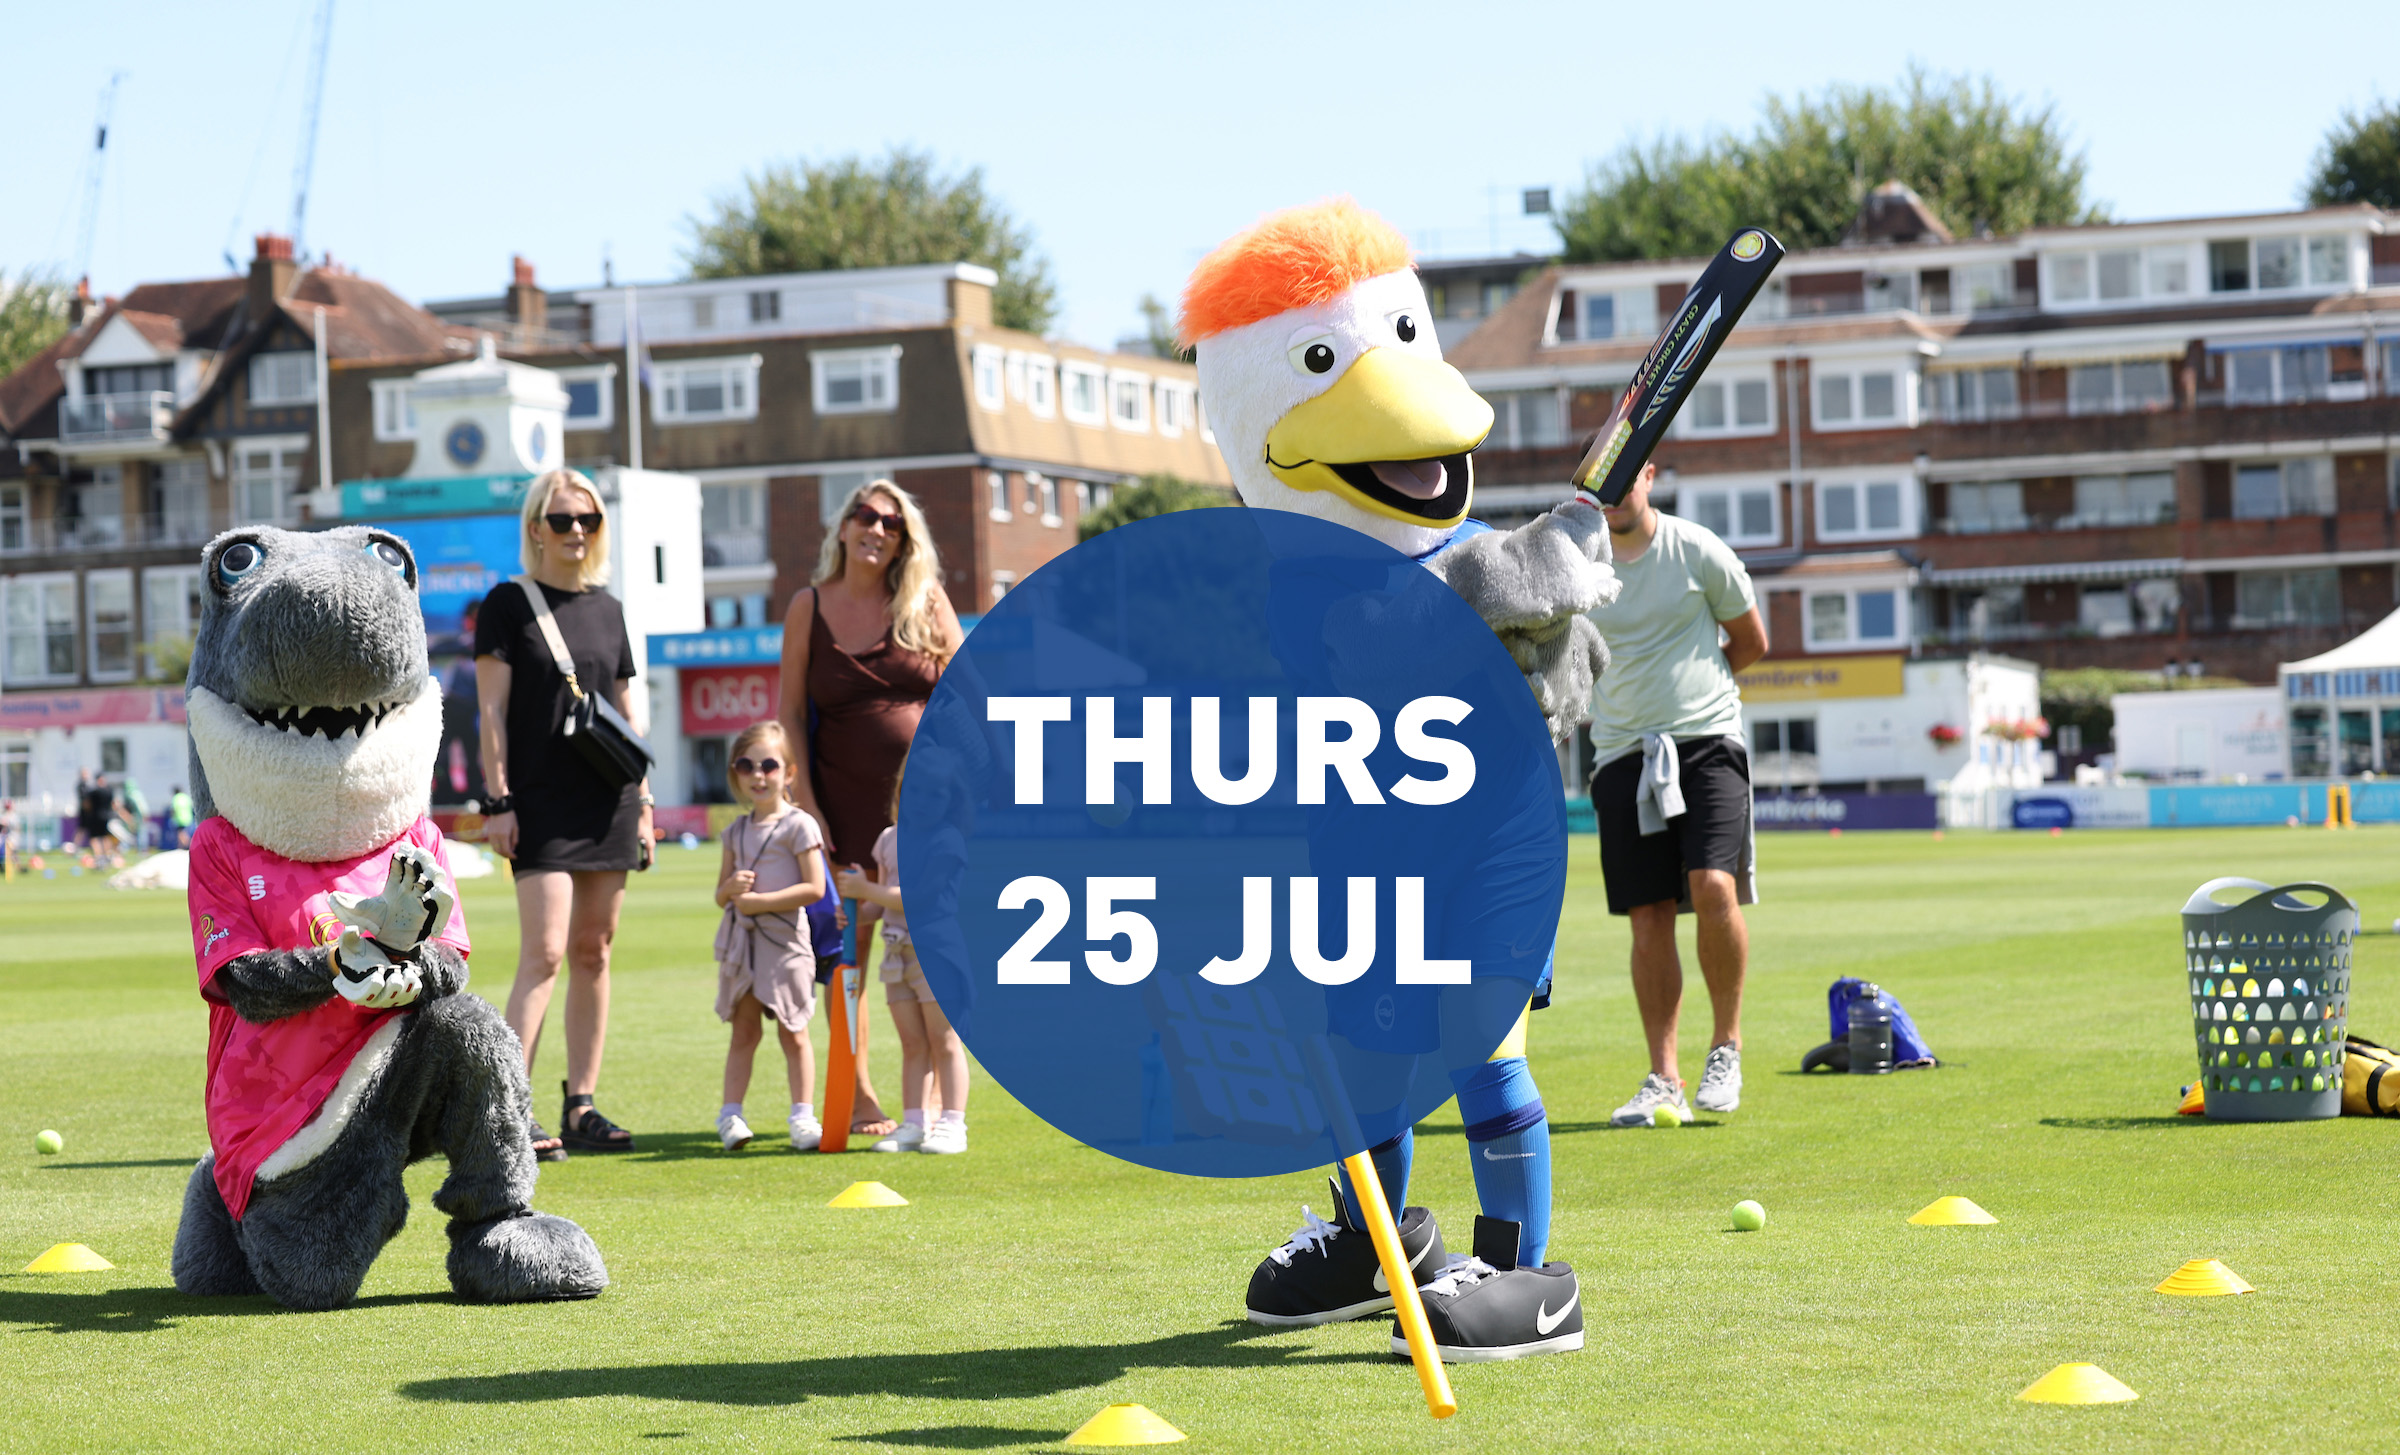 Family Fun Day with Sussex Cricket Foundation